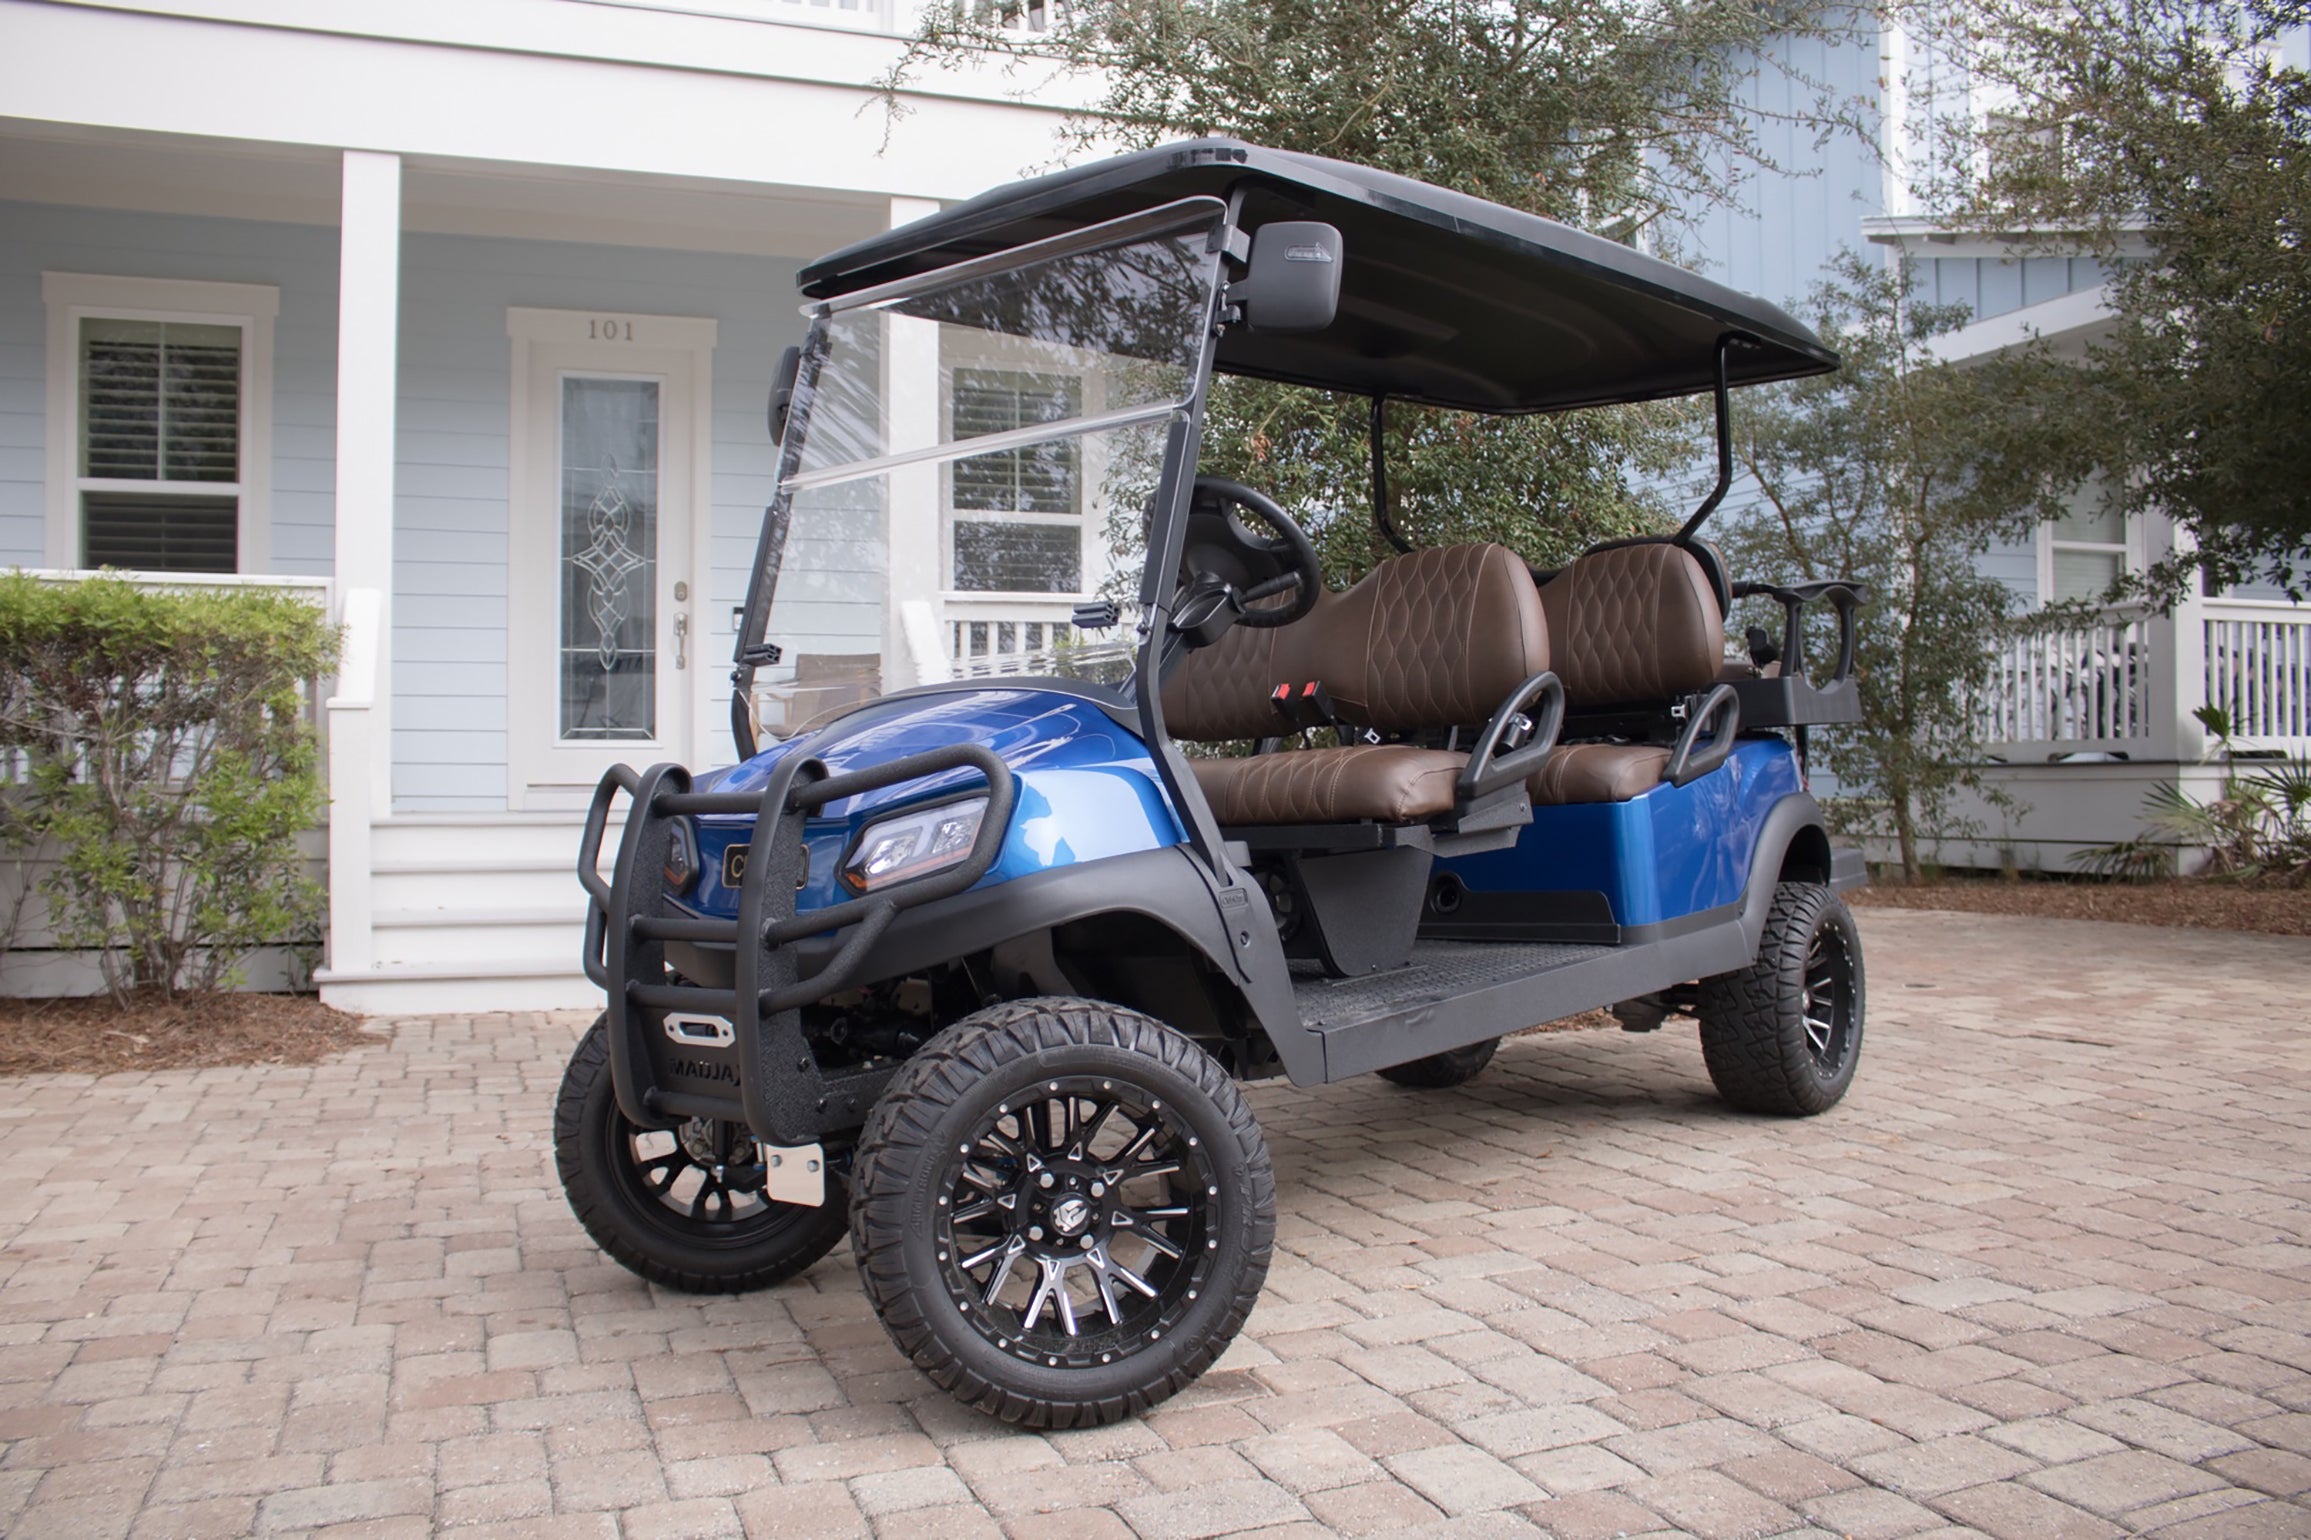 Go for a ride on the Golf Cart!